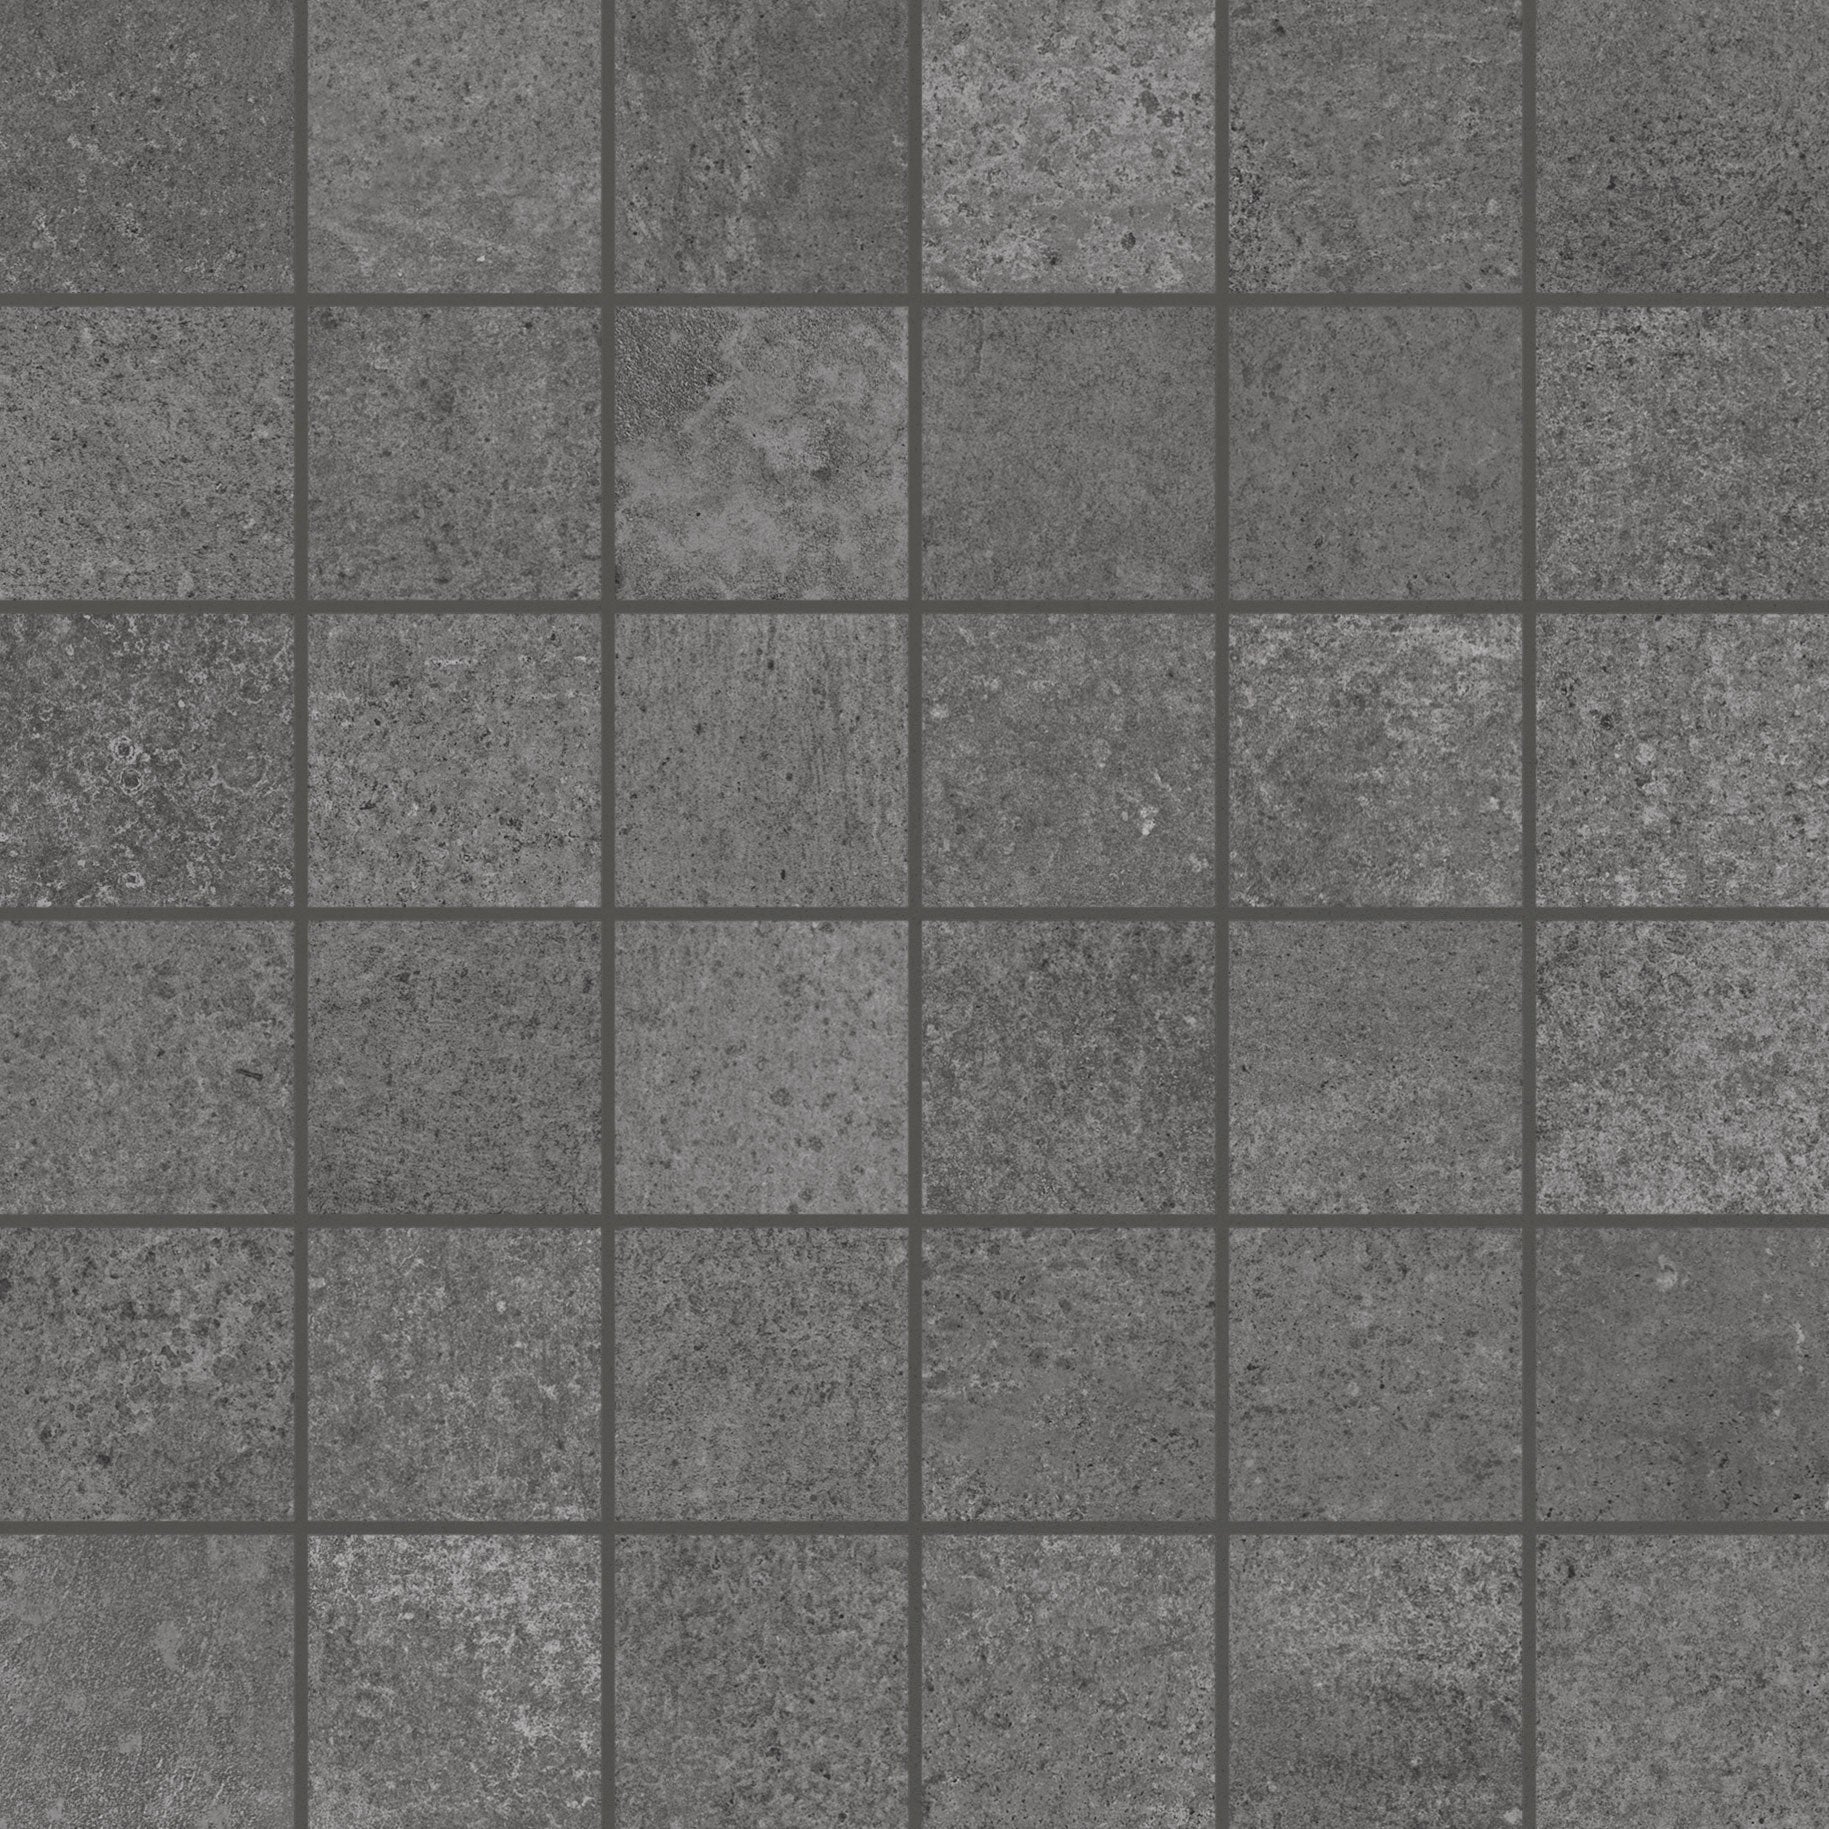 landmark 9mm madein liberty black straight stack 2x2 mosaic 12x12x9mm matte rectified porcelain tile distributed by surface group international